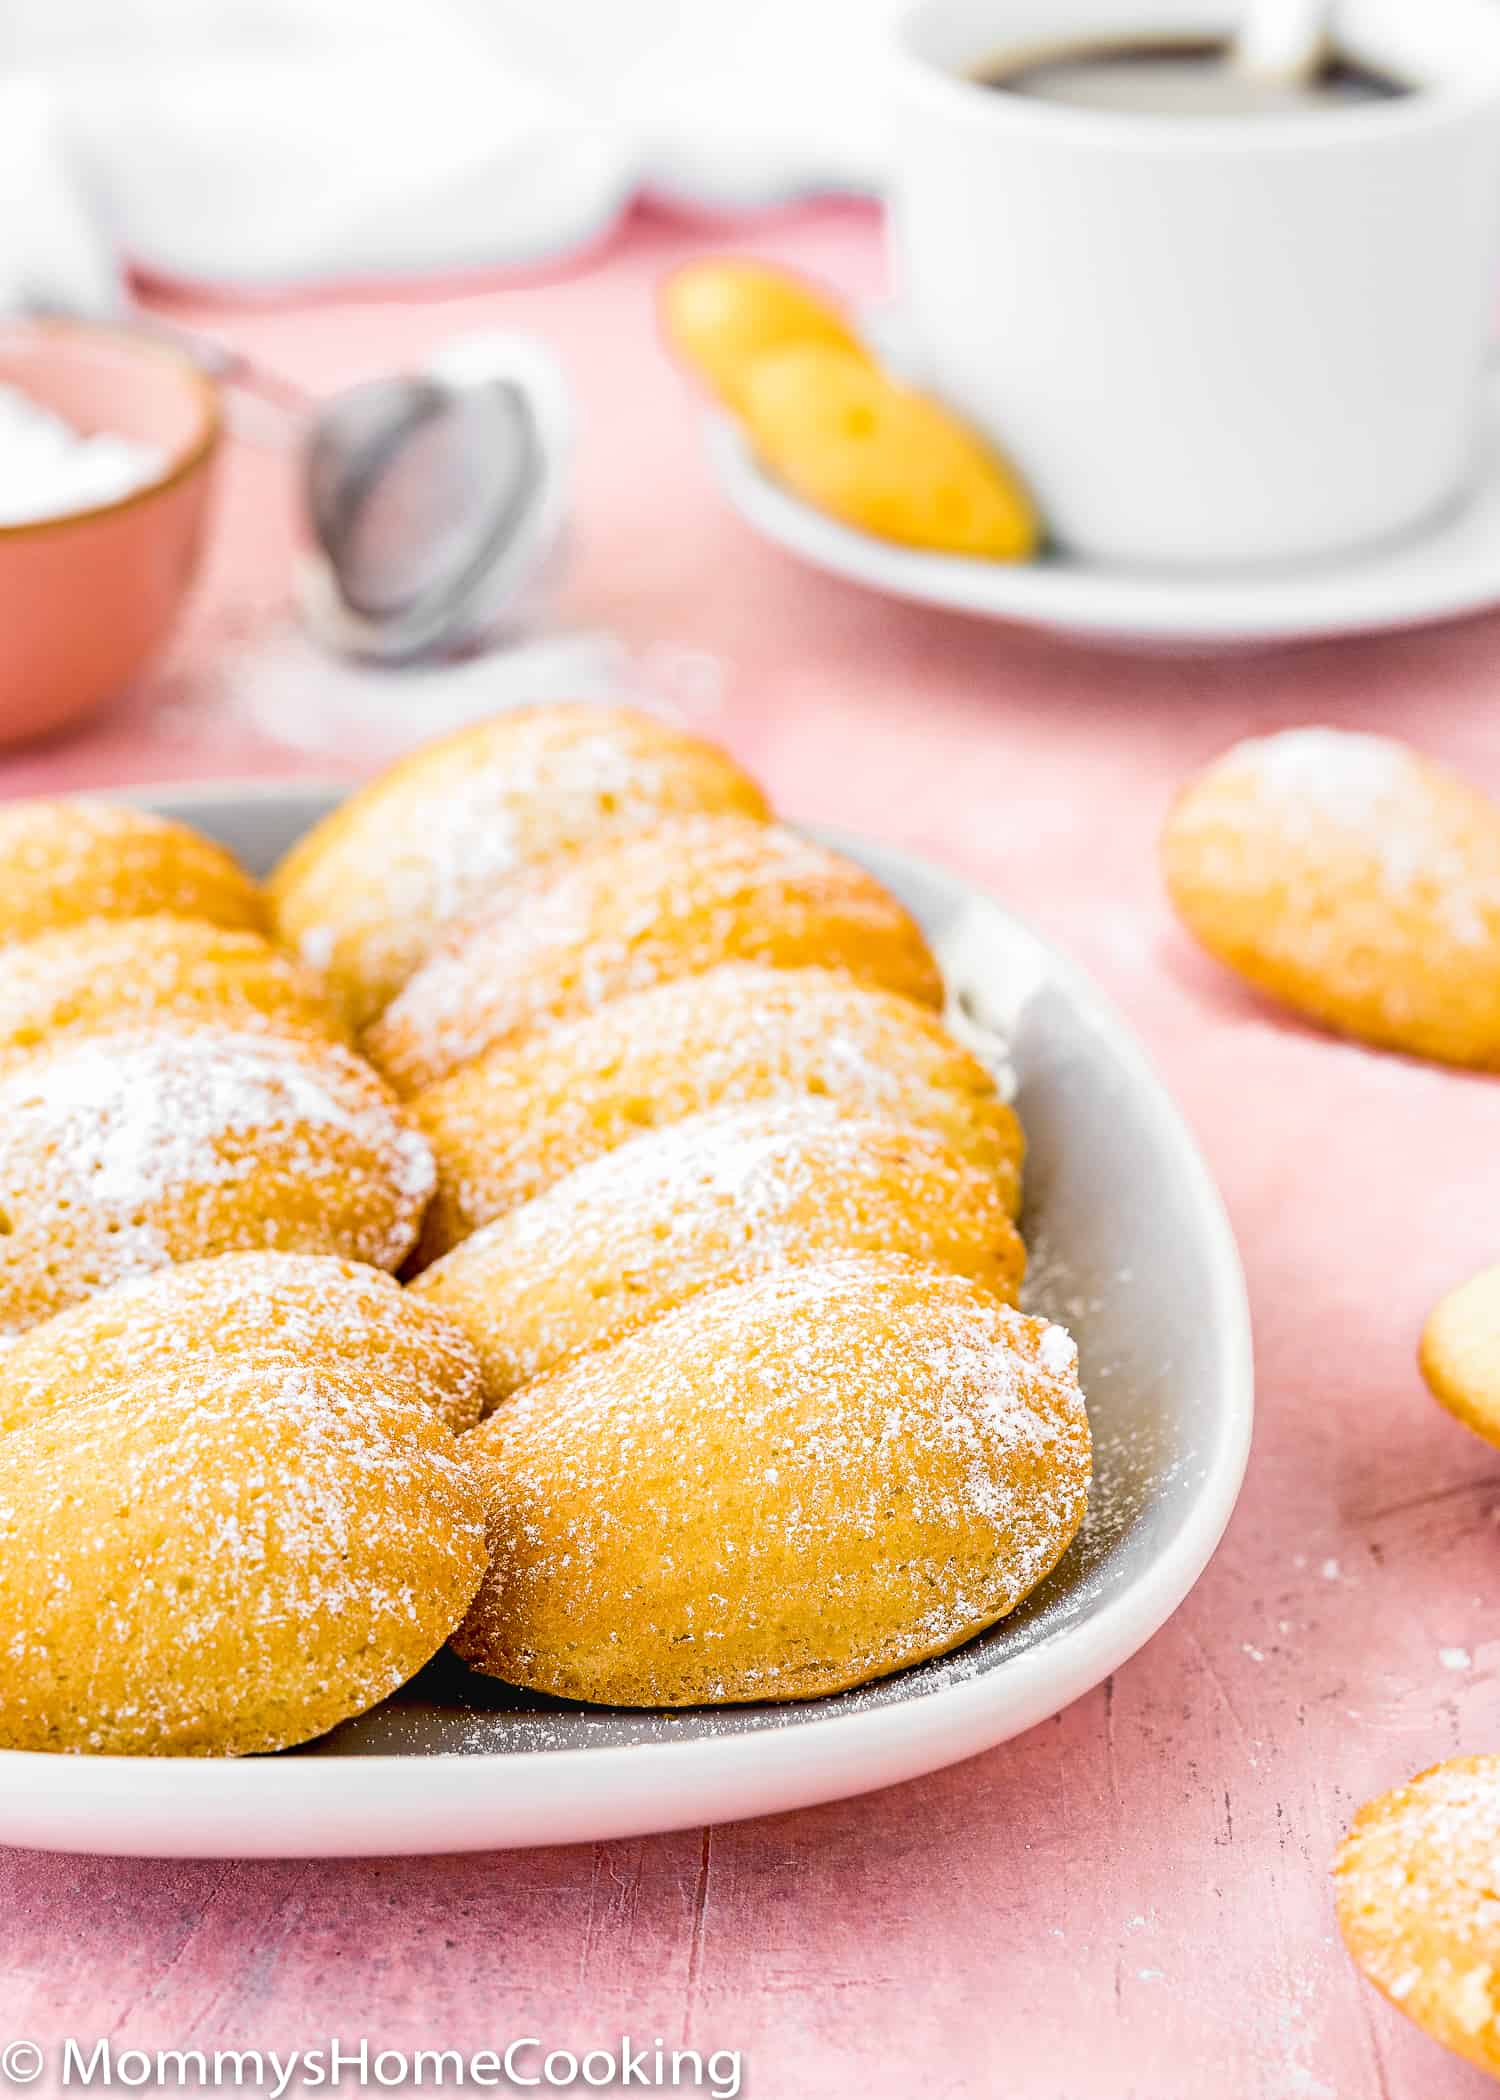 Eggless Madeleines (The Best, Easiest Recipe) - Mommy's Home Cooking